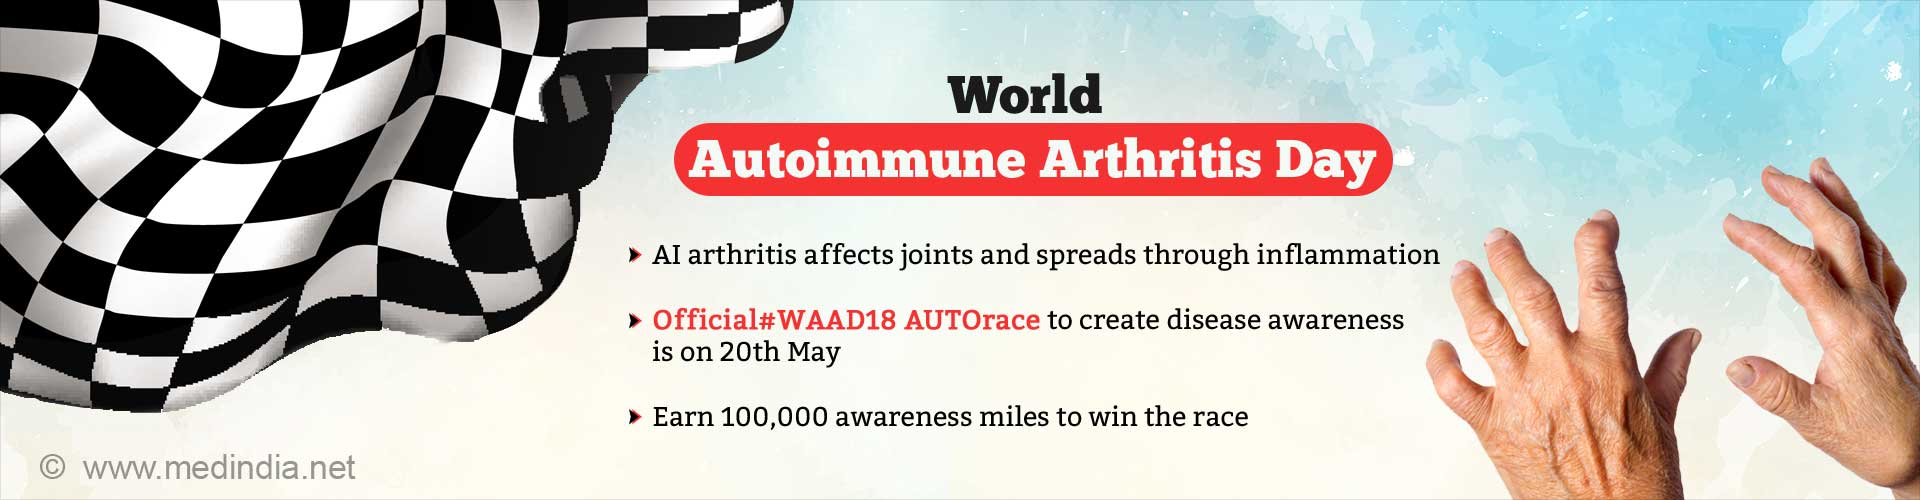 world autoimmune arthritis day
- ai arthritis affects joints and spreads through inflammation
- offical #WAAD18 AUTOrace to create disease awareness is on 20 may
- earn 100,000 awareness miles to win the race